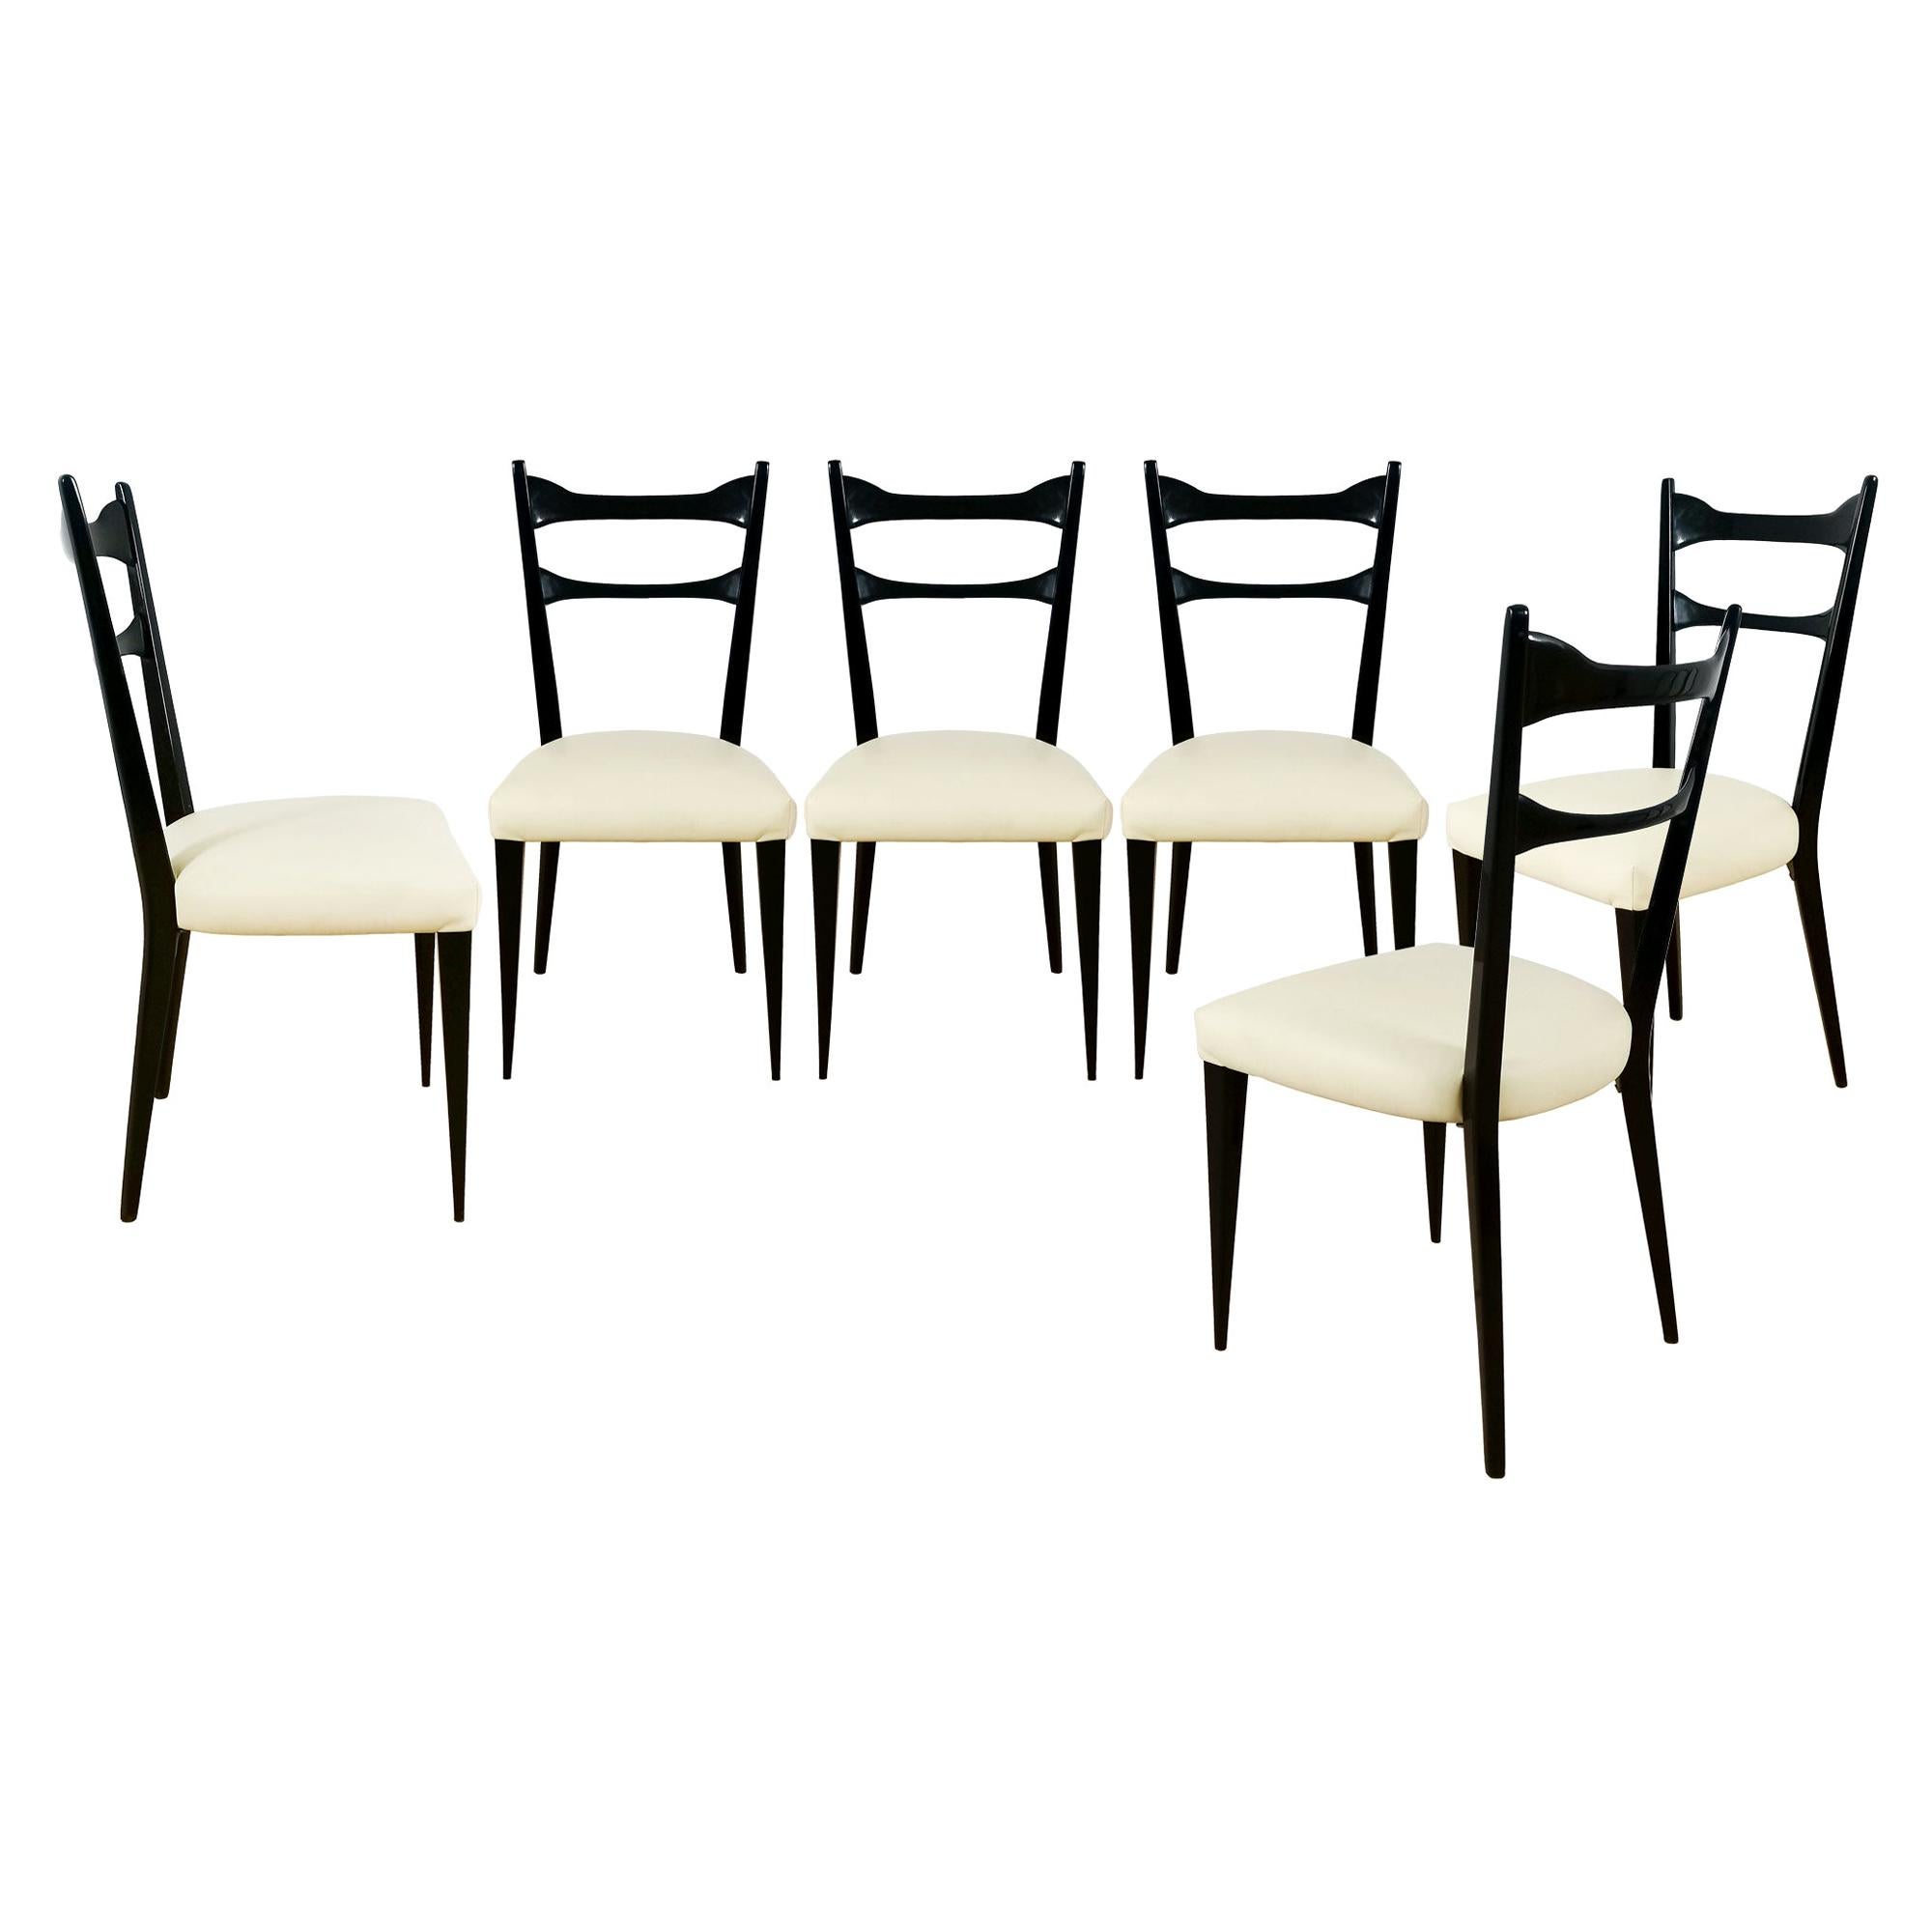 Set of Six Mid-Century Modern Chairs in Beech and Ivory Leather - Italy